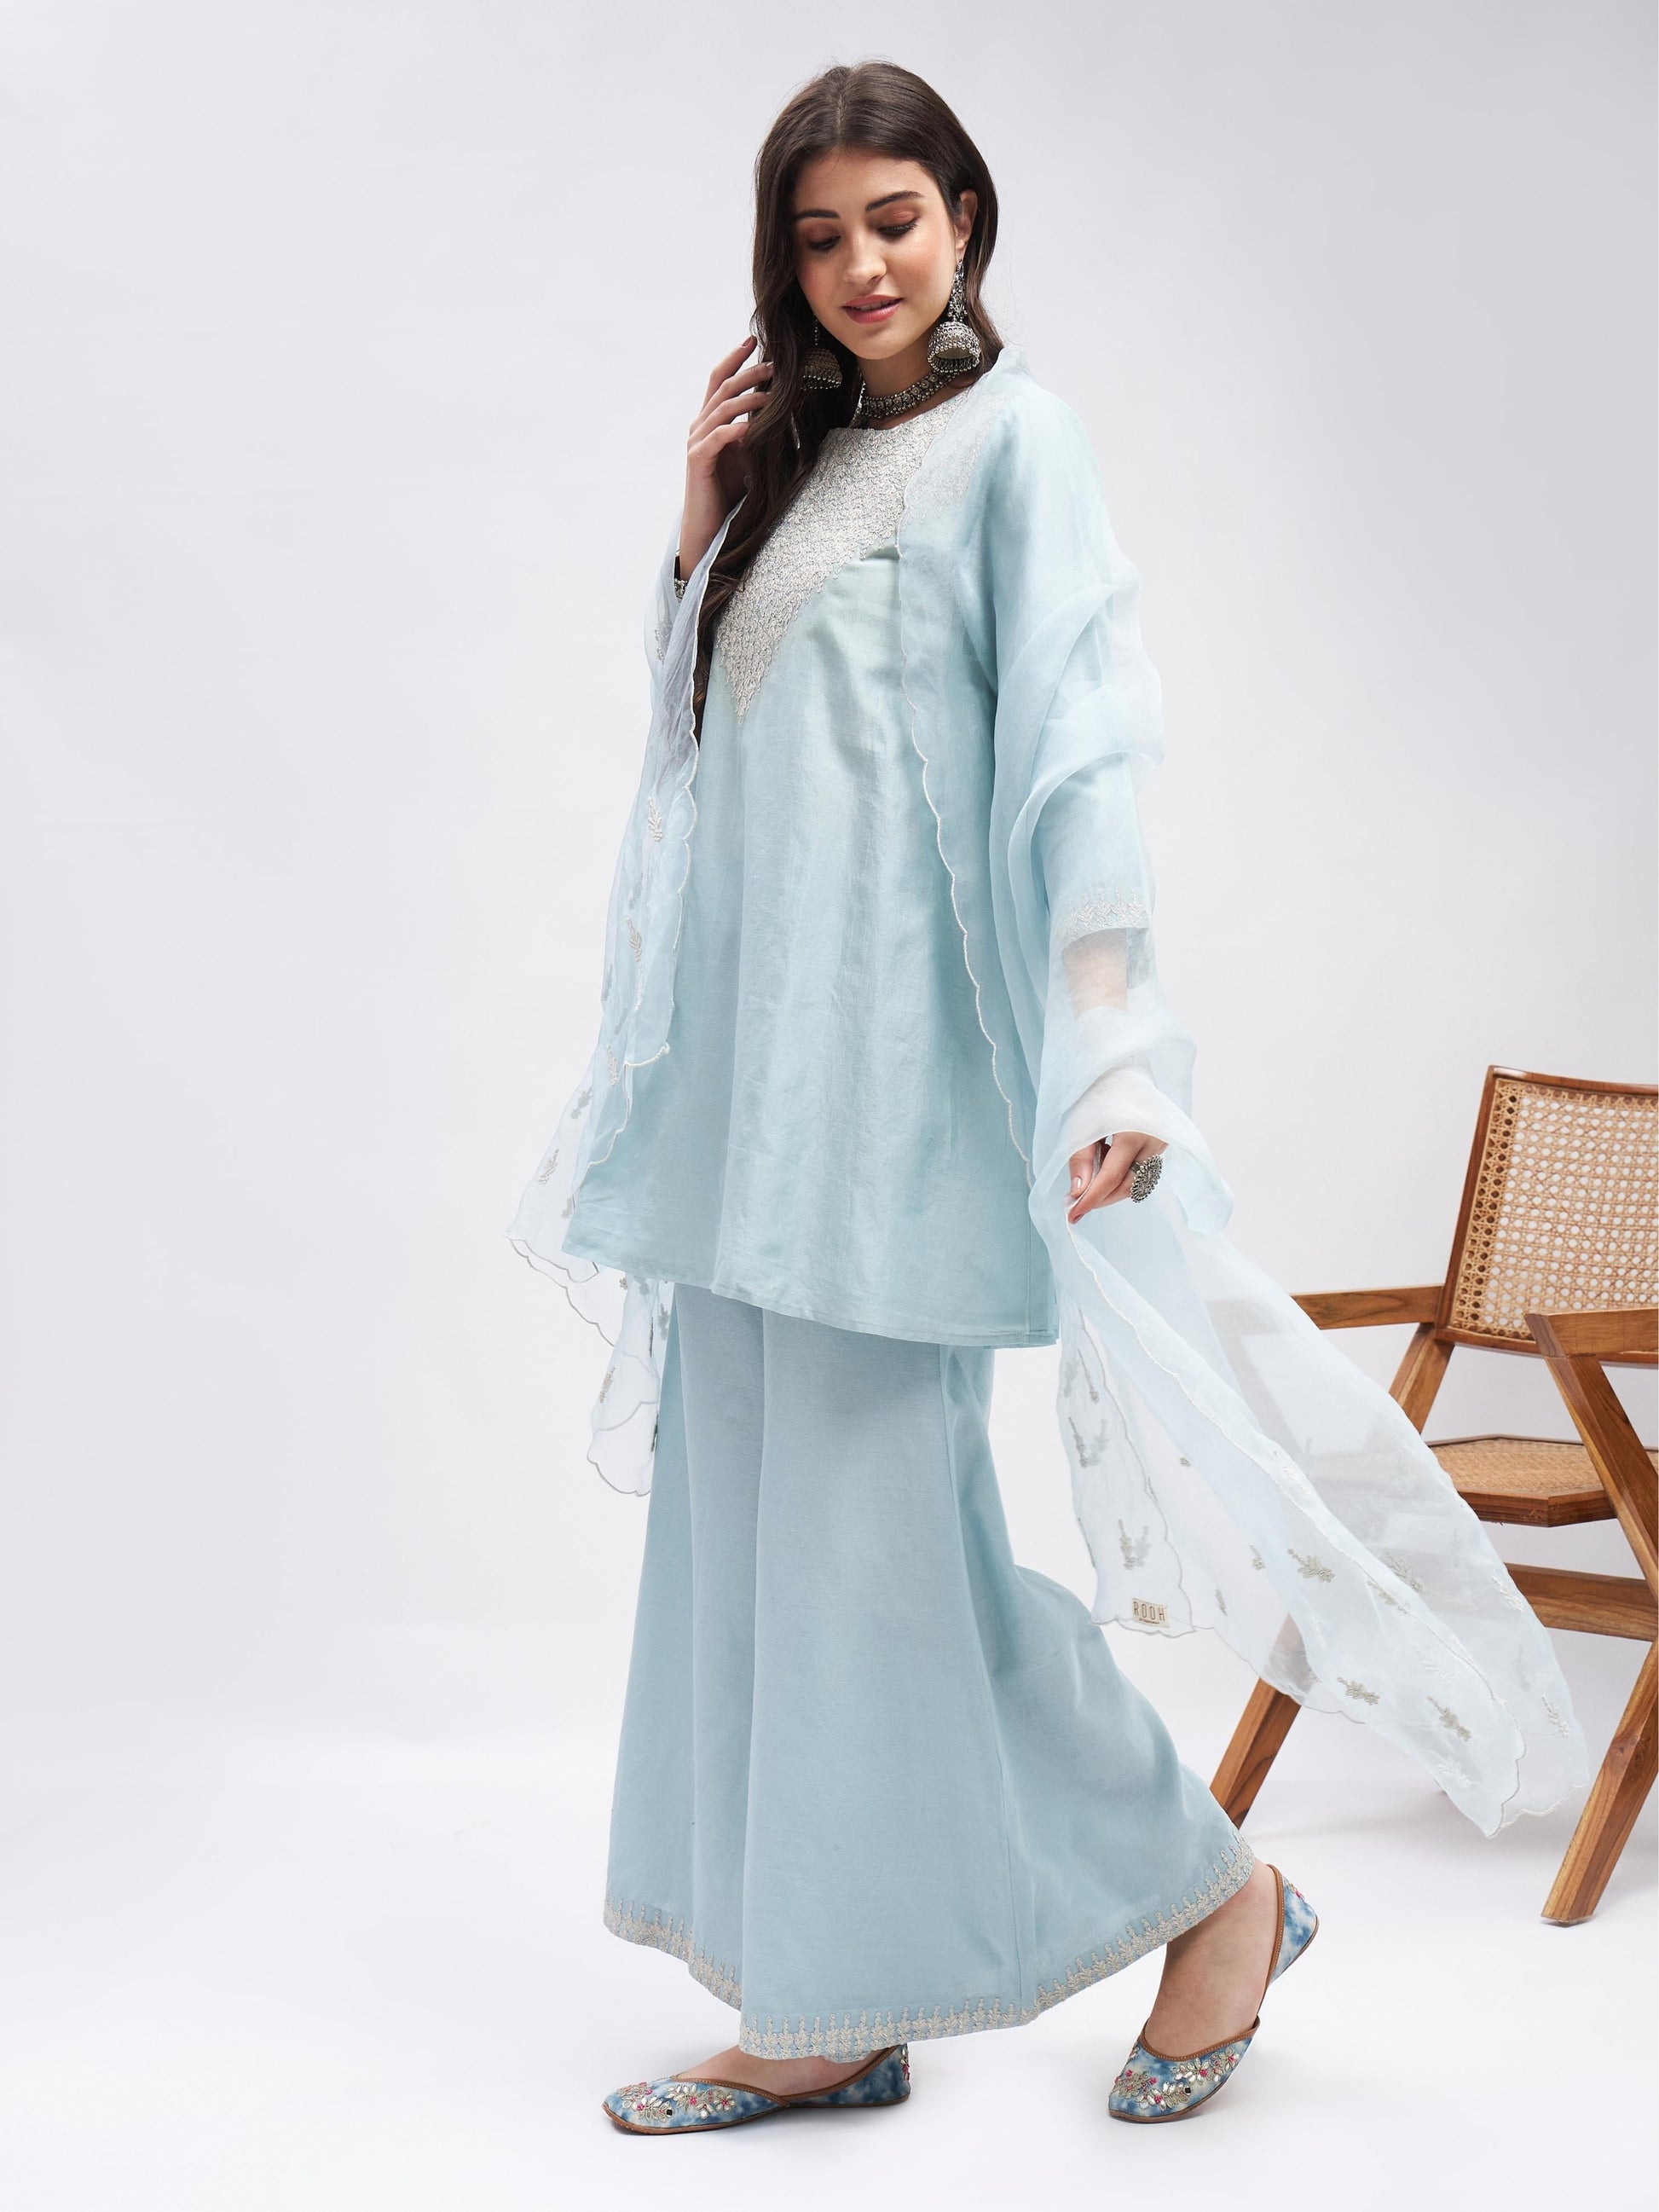 Blue Zari Embroidered Chanderi Silk Kurta Set with Dupatta at Kamakhyaa by RoohbyRidhimaa. This item is Blue, Casual Wear, Chanderi Silk, Cotton, Dupattas, Embroidered, Kurta Set with Dupattas, Kurta Sets, Organza, Relaxed Fit, Silk Chanderi, Toxin free, Zari Embroidered